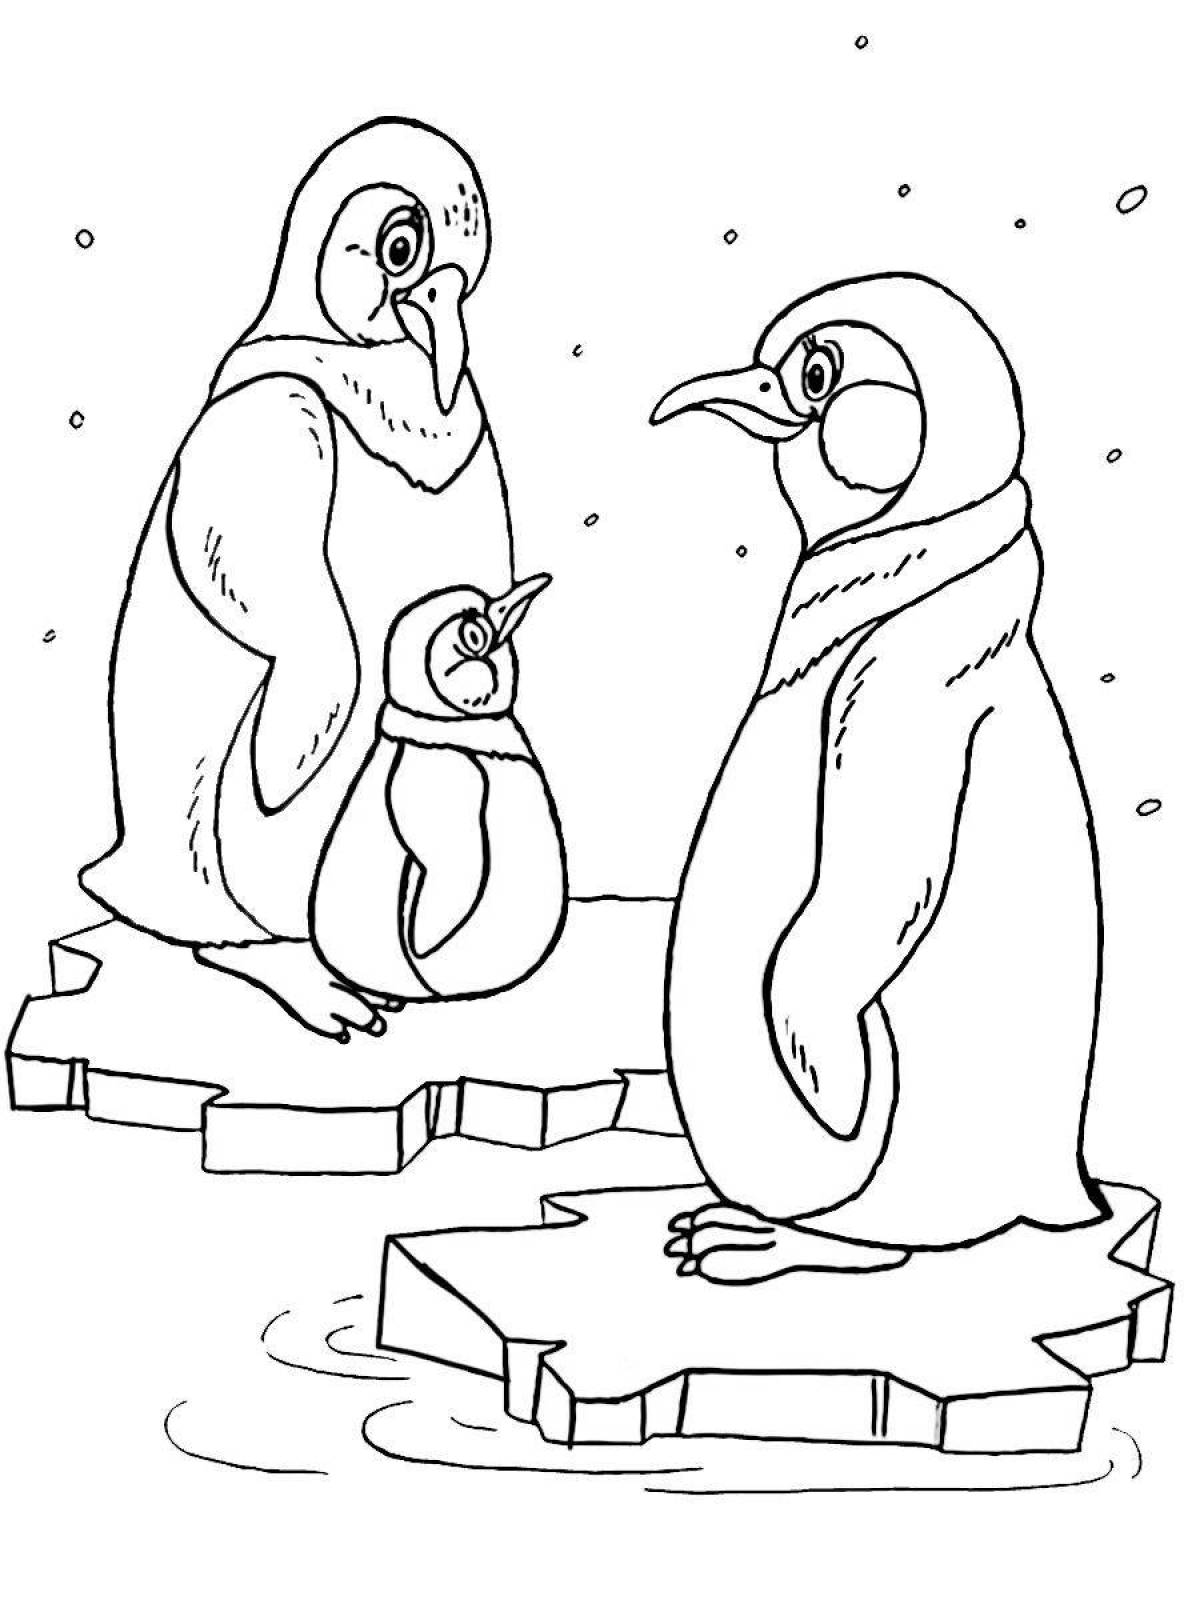 Awesome scandinavian animals coloring page